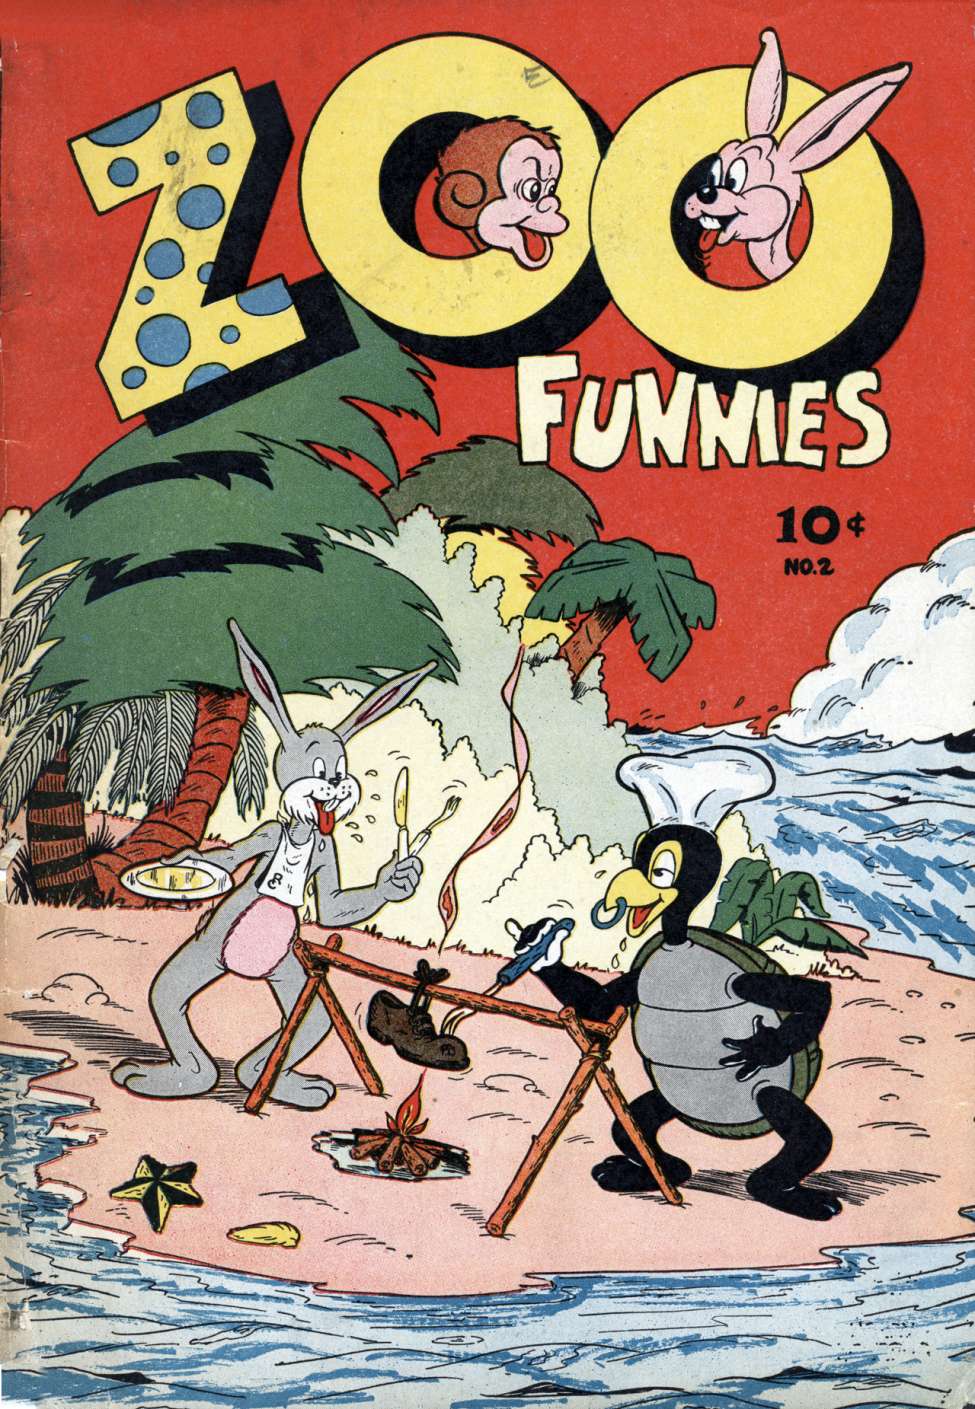 Comic Book Cover For Zoo Funnies v1 2